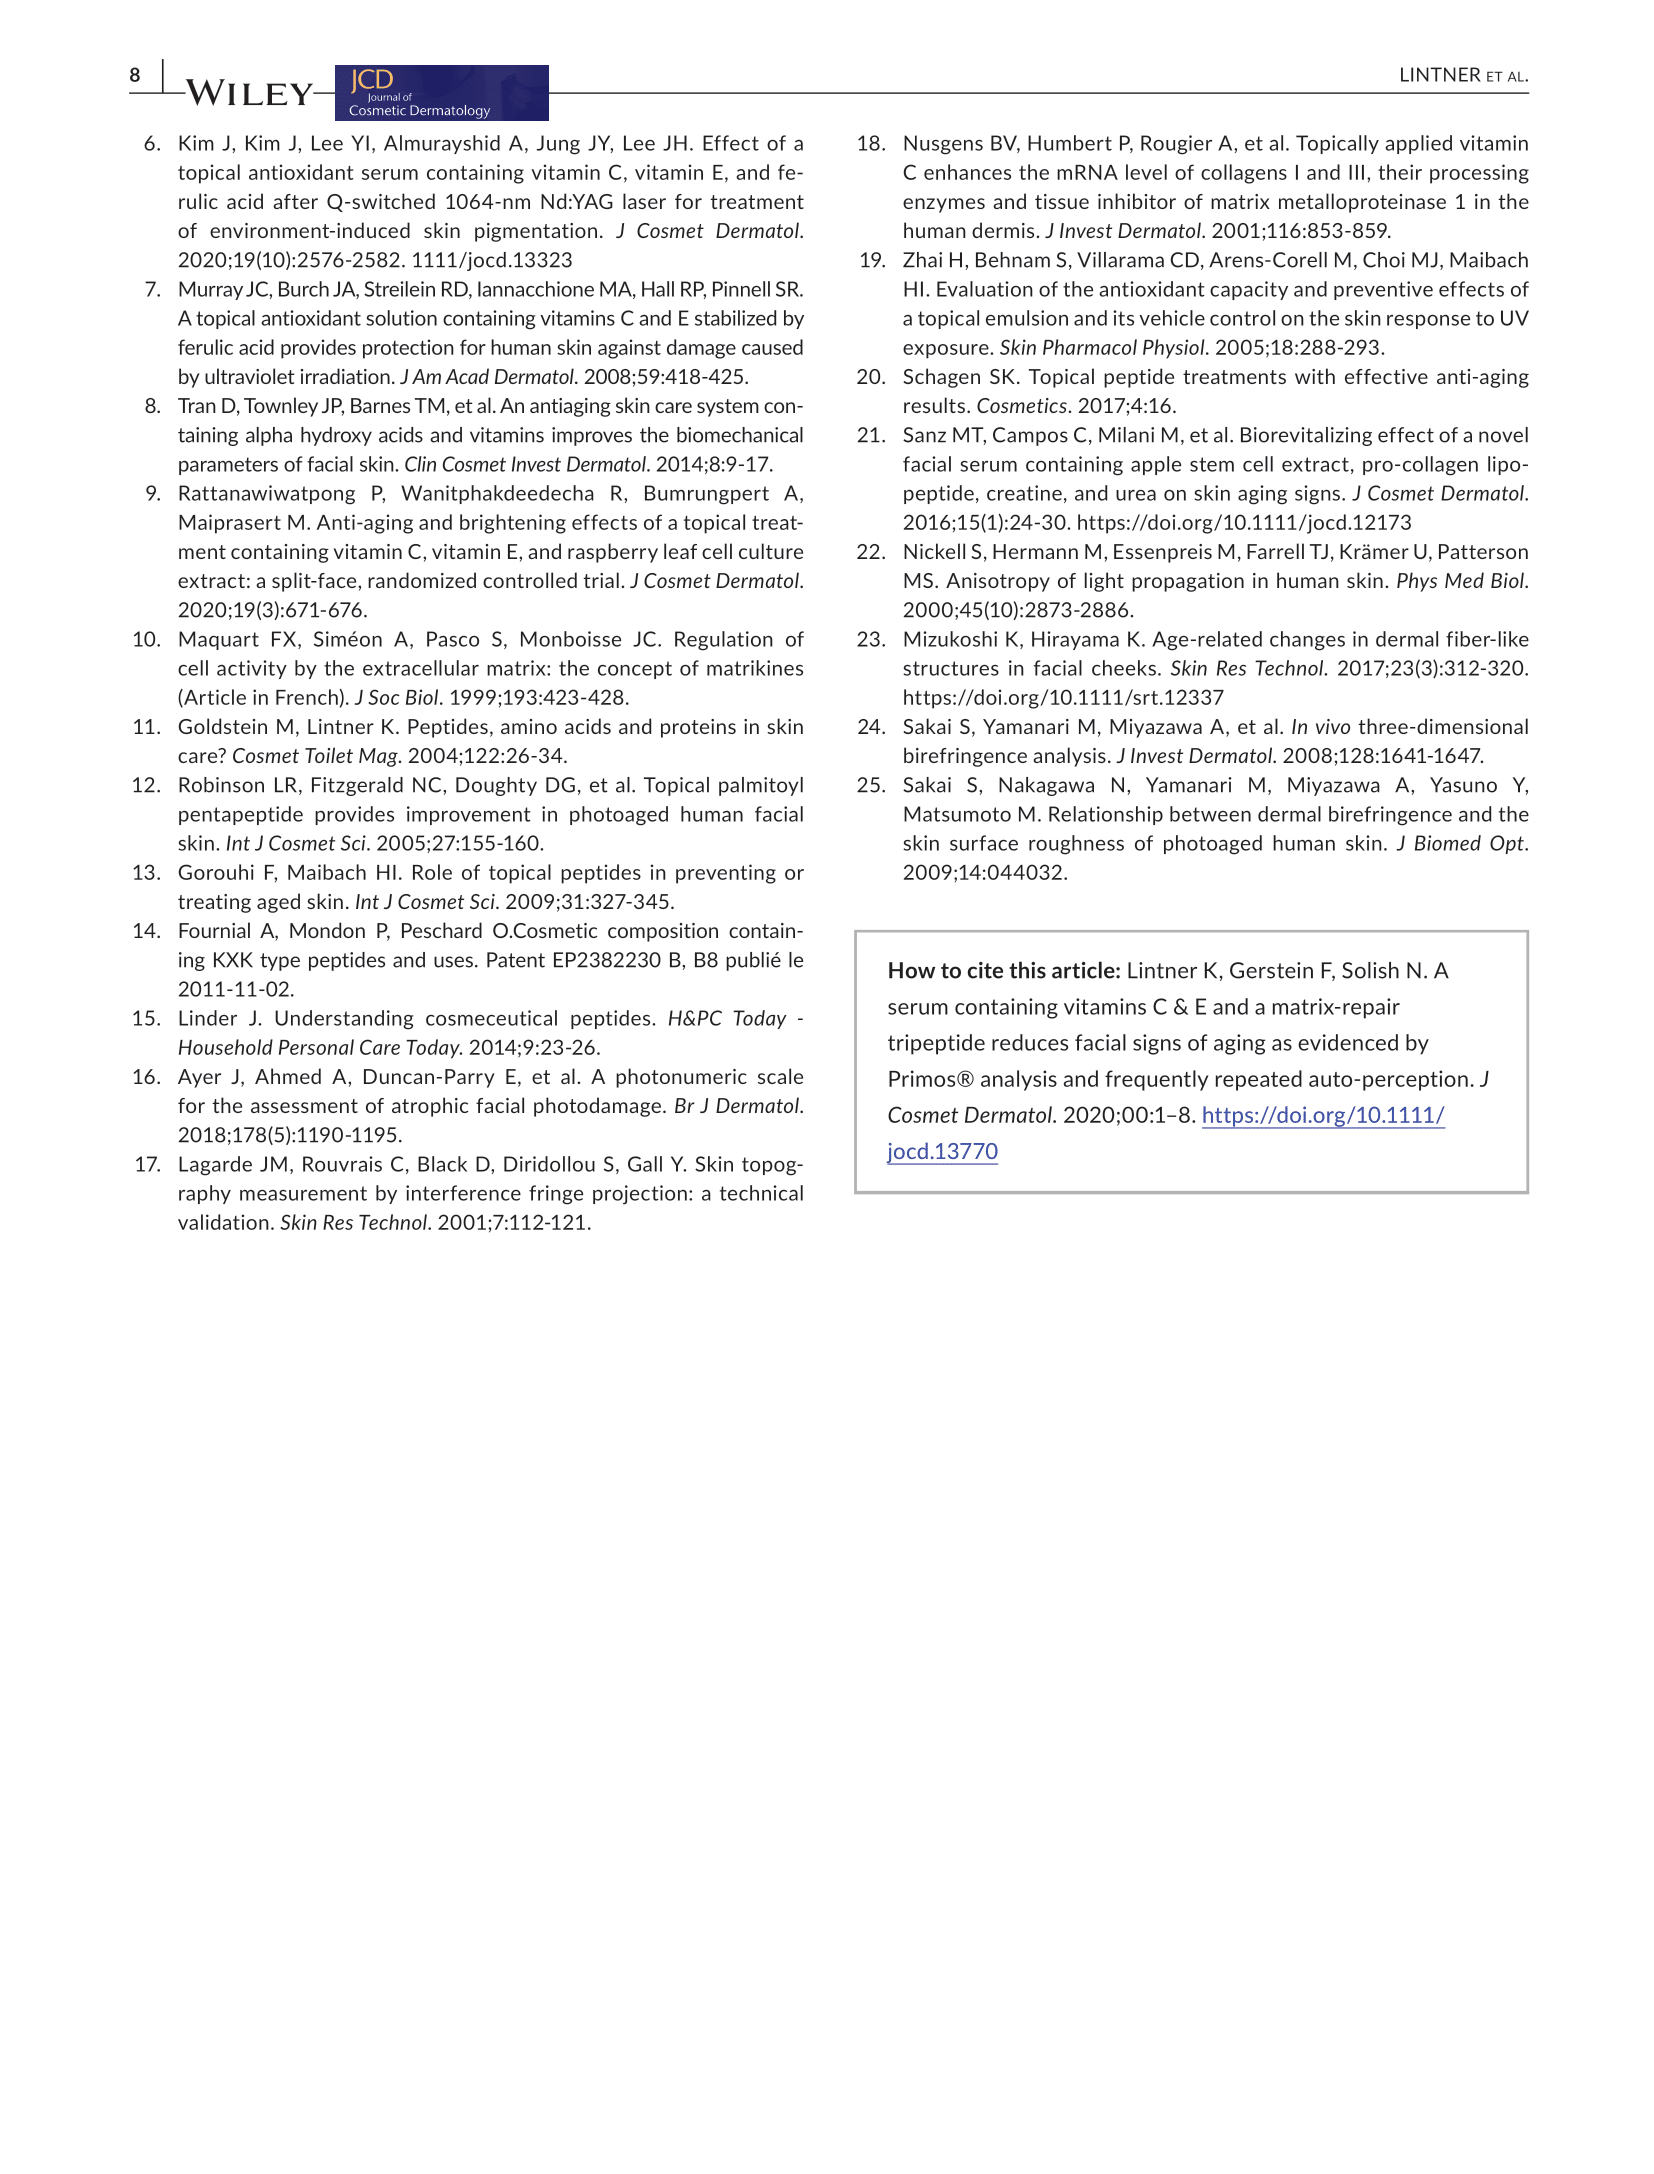 Published article in JCD-8.png